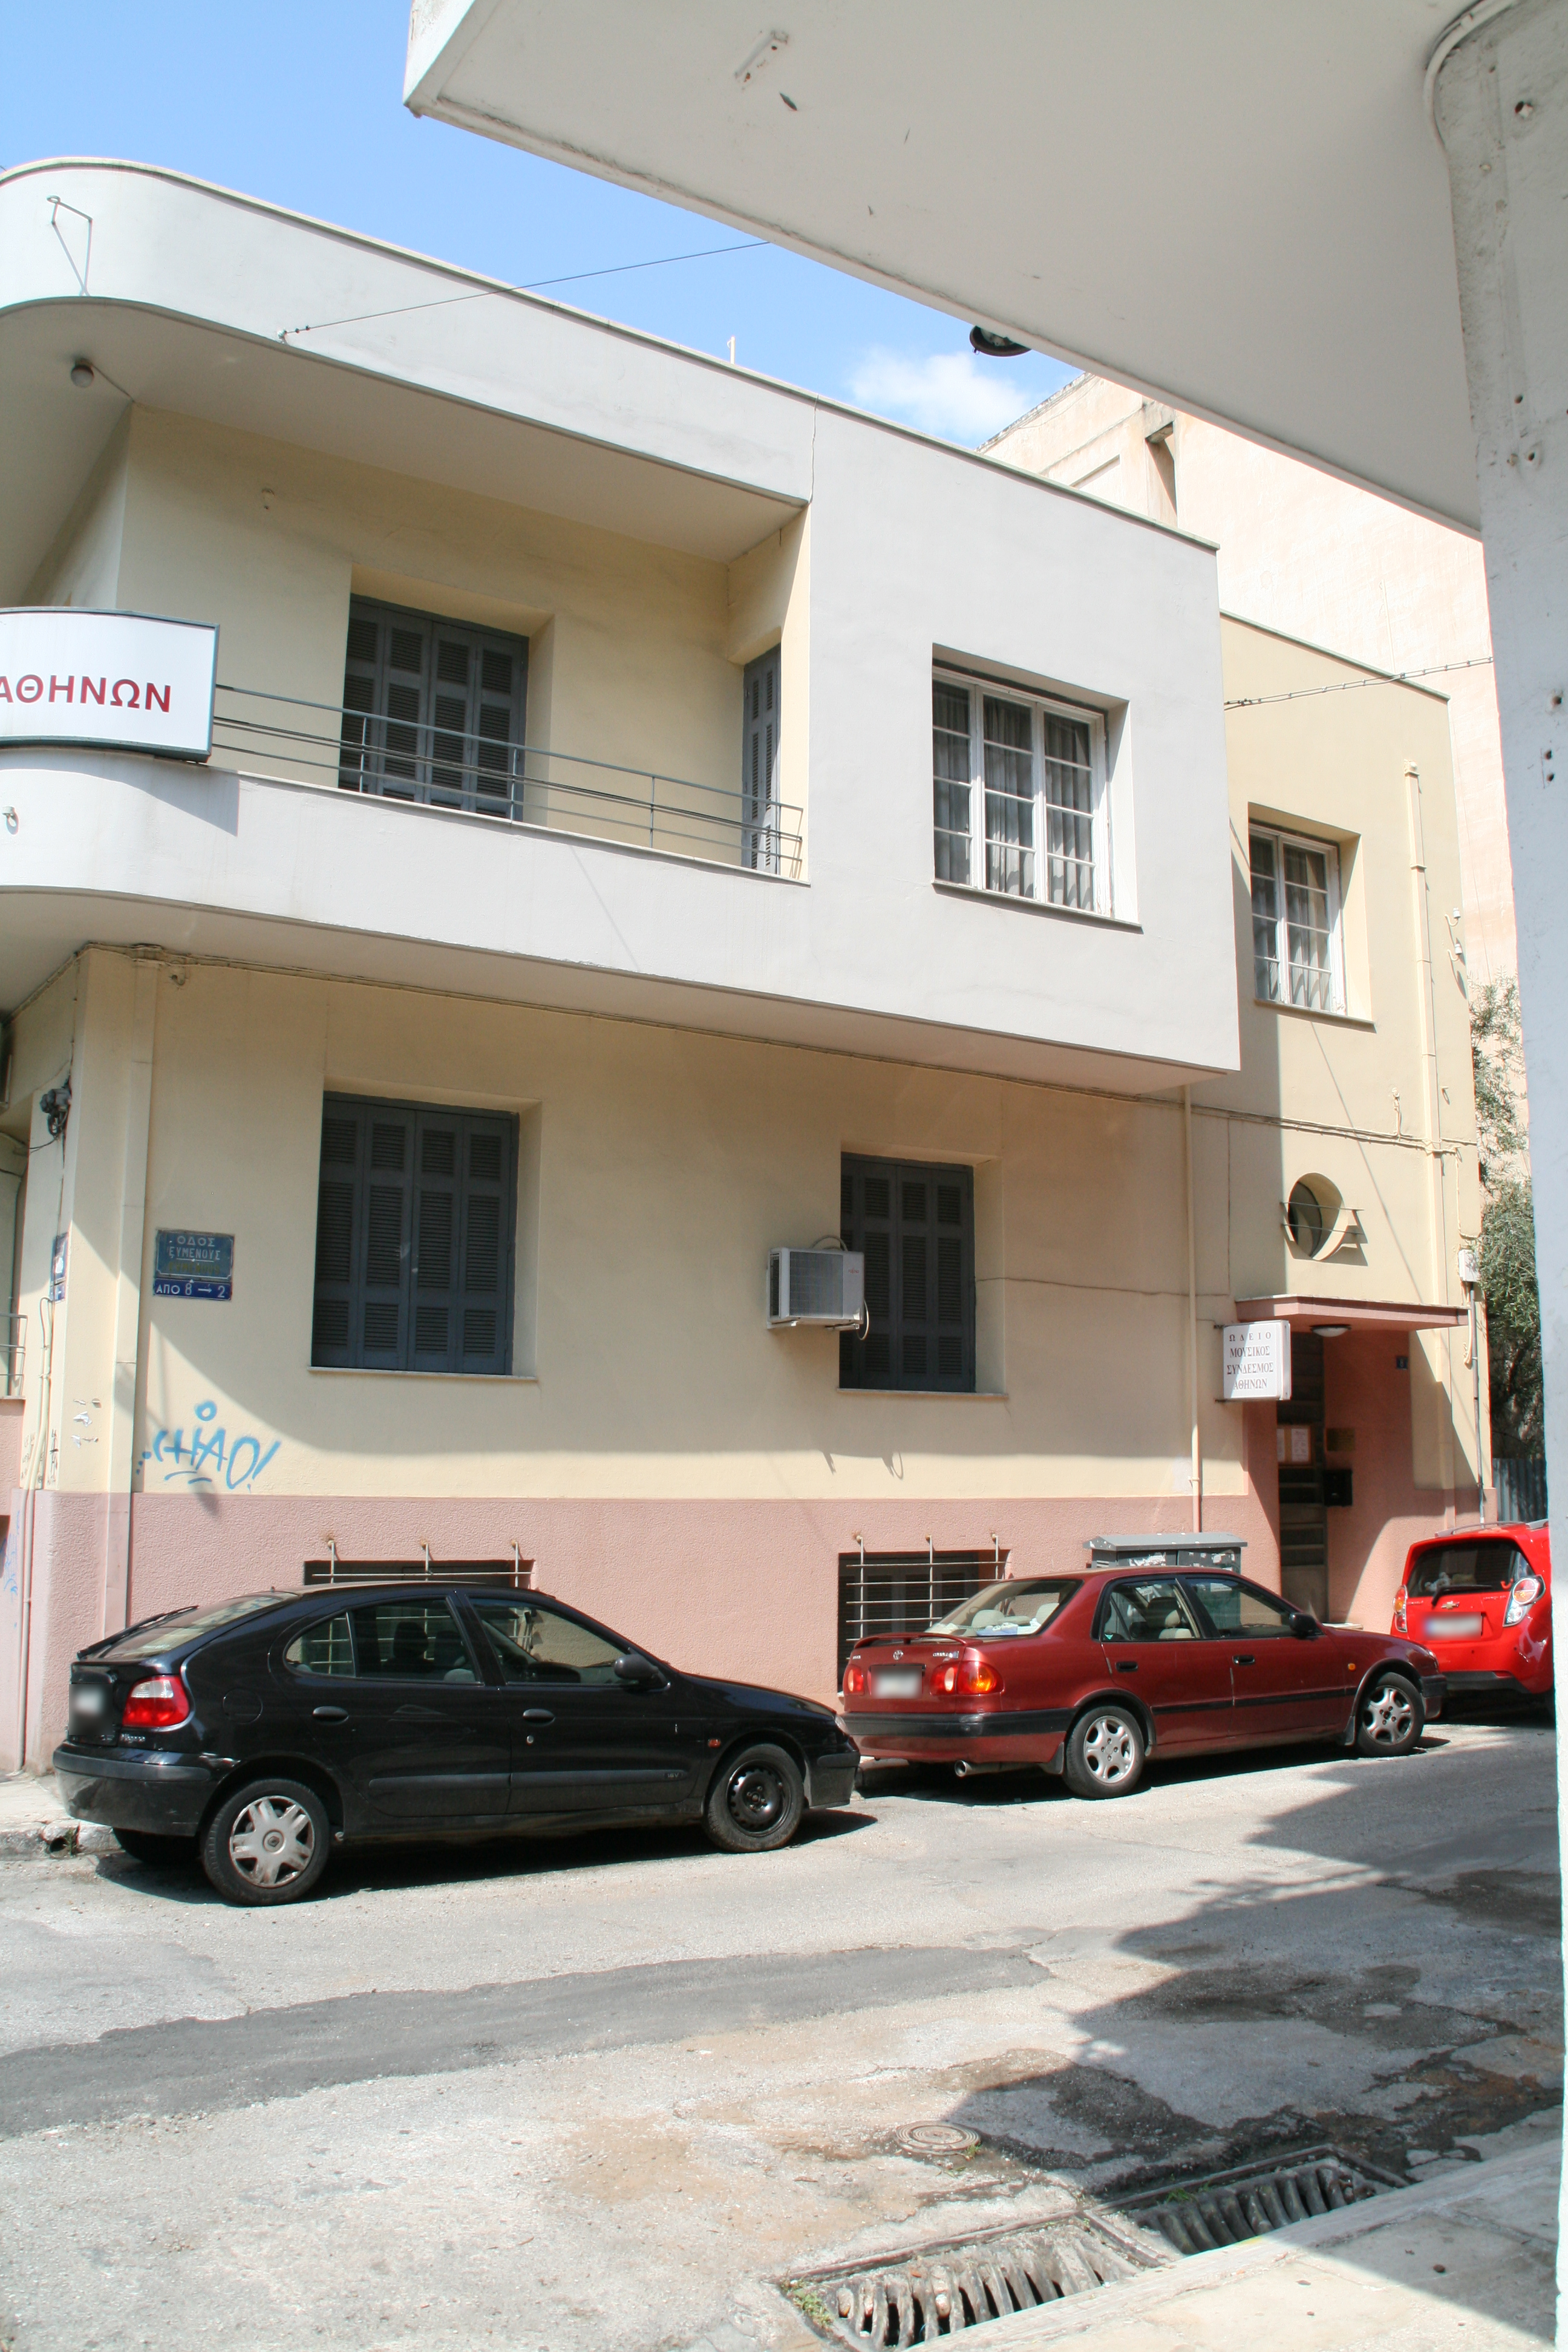 General view of the facade on Evmenous street (2014)